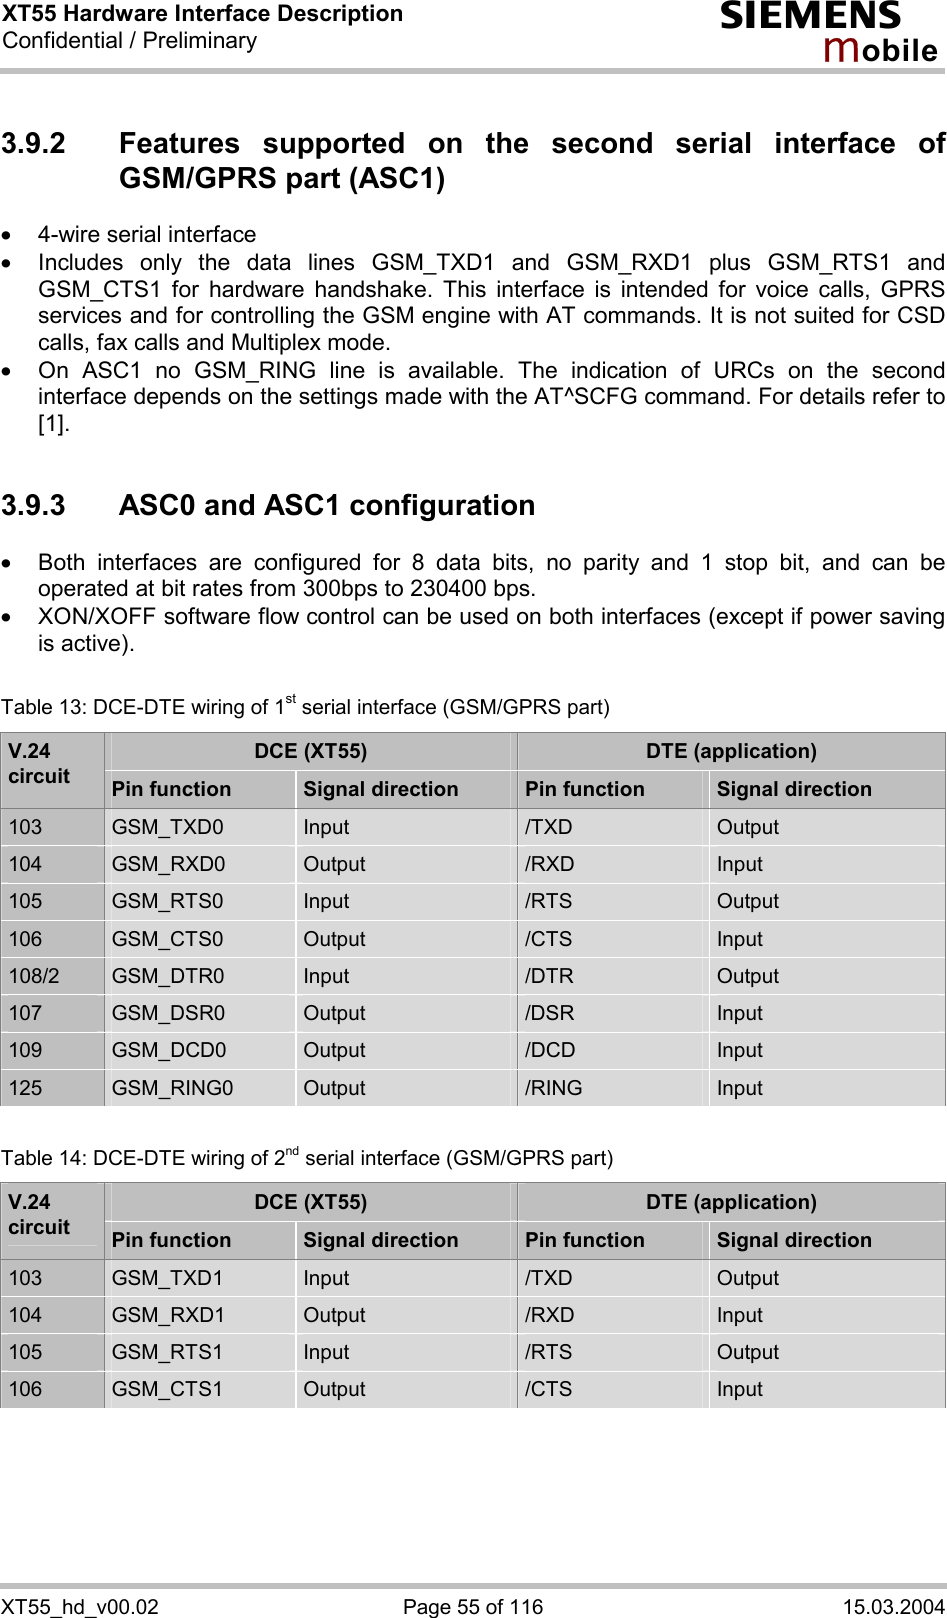 XT55 Hardware Interface Description Confidential / Preliminary s mo b i l e XT55_hd_v00.02  Page 55 of 116  15.03.2004 3.9.2  Features supported on the second serial interface of GSM/GPRS part (ASC1) ·  4-wire serial interface ·  Includes only the data lines GSM_TXD1 and GSM_RXD1 plus GSM_RTS1 and GSM_CTS1 for hardware handshake. This interface is intended for voice calls, GPRS services and for controlling the GSM engine with AT commands. It is not suited for CSD calls, fax calls and Multiplex mode.  ·  On ASC1 no GSM_RING line is available. The indication of URCs on the second interface depends on the settings made with the AT^SCFG command. For details refer to [1].  3.9.3  ASC0 and ASC1 configuration ·  Both interfaces are configured for 8 data bits, no parity and 1 stop bit, and can be operated at bit rates from 300bps to 230400 bps.  ·  XON/XOFF software flow control can be used on both interfaces (except if power saving is active).  Table 13: DCE-DTE wiring of 1st serial interface (GSM/GPRS part) DCE (XT55)  DTE (application) V.24 circuit  Pin function  Signal direction  Pin function  Signal direction 103  GSM_TXD0  Input  /TXD  Output 104  GSM_RXD0  Output  /RXD  Input 105  GSM_RTS0  Input  /RTS  Output 106  GSM_CTS0  Output  /CTS  Input 108/2  GSM_DTR0  Input  /DTR  Output 107  GSM_DSR0  Output  /DSR  Input 109  GSM_DCD0  Output  /DCD  Input 125  GSM_RING0  Output  /RING  Input  Table 14: DCE-DTE wiring of 2nd serial interface (GSM/GPRS part) DCE (XT55)  DTE (application) V.24 circuit  Pin function  Signal direction  Pin function  Signal direction 103  GSM_TXD1  Input  /TXD  Output 104  GSM_RXD1  Output  /RXD  Input 105  GSM_RTS1  Input  /RTS  Output 106  GSM_CTS1  Output  /CTS  Input    